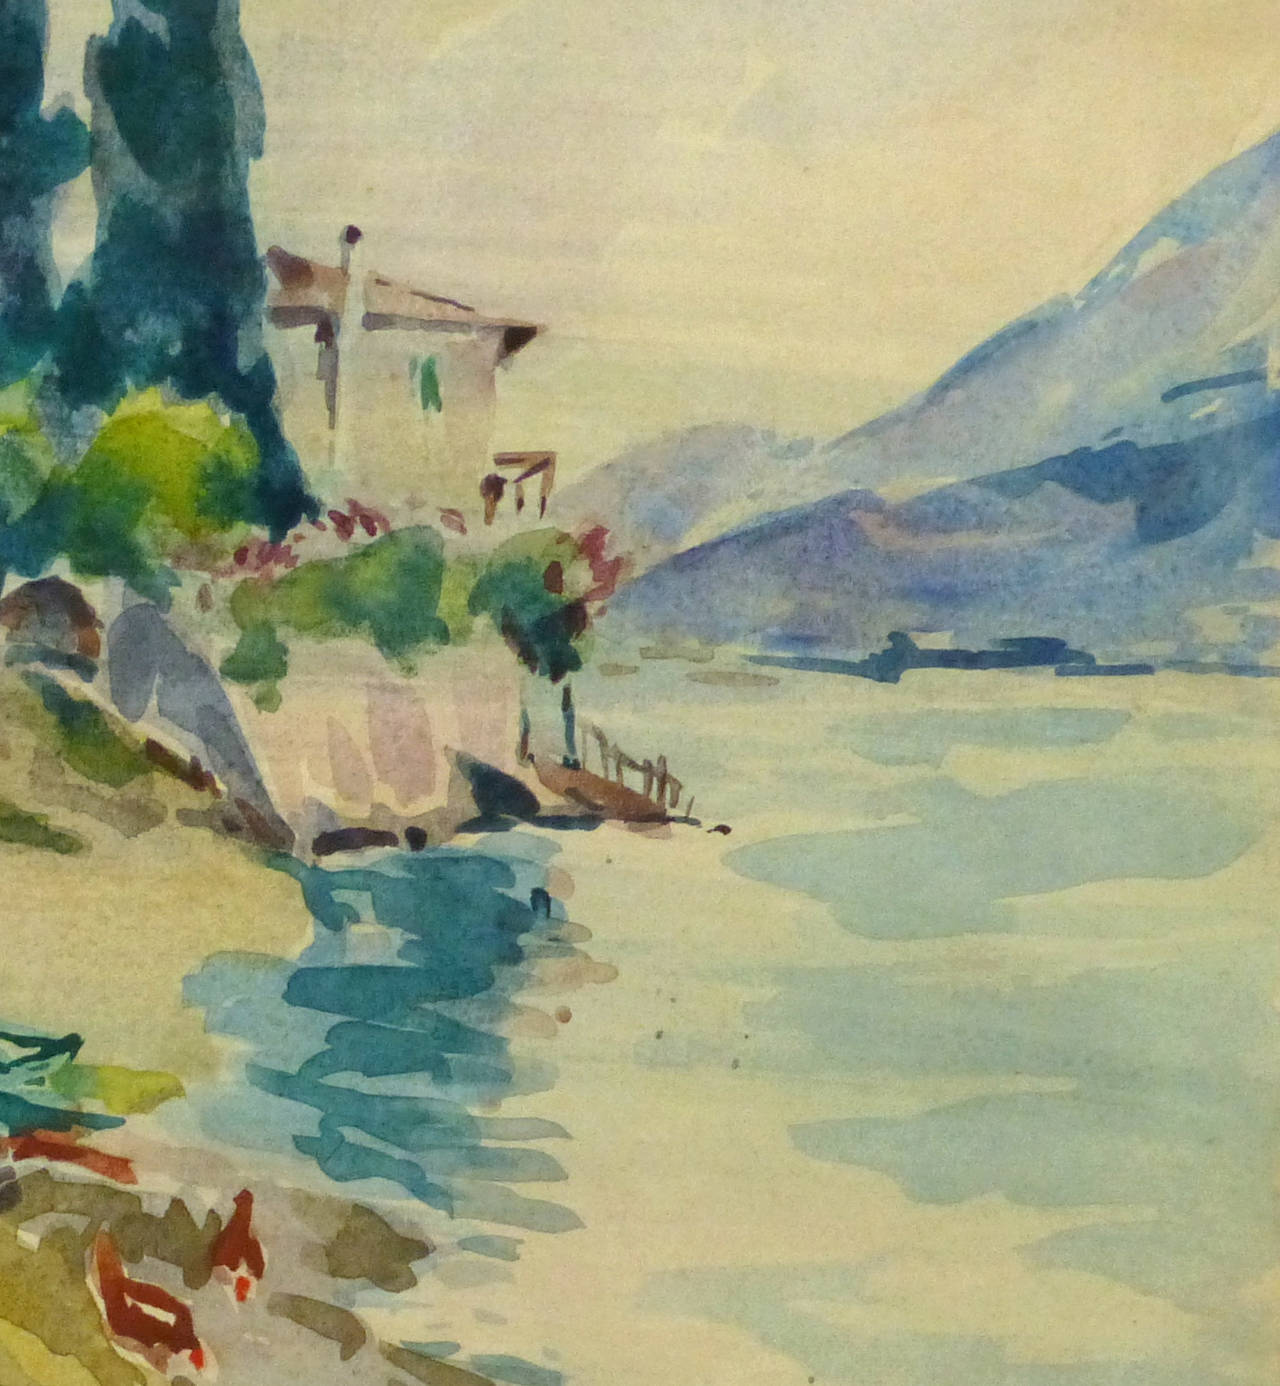 Vintage French Landscape - The Water's Edge - Brown Landscape Art by Roger Tochon